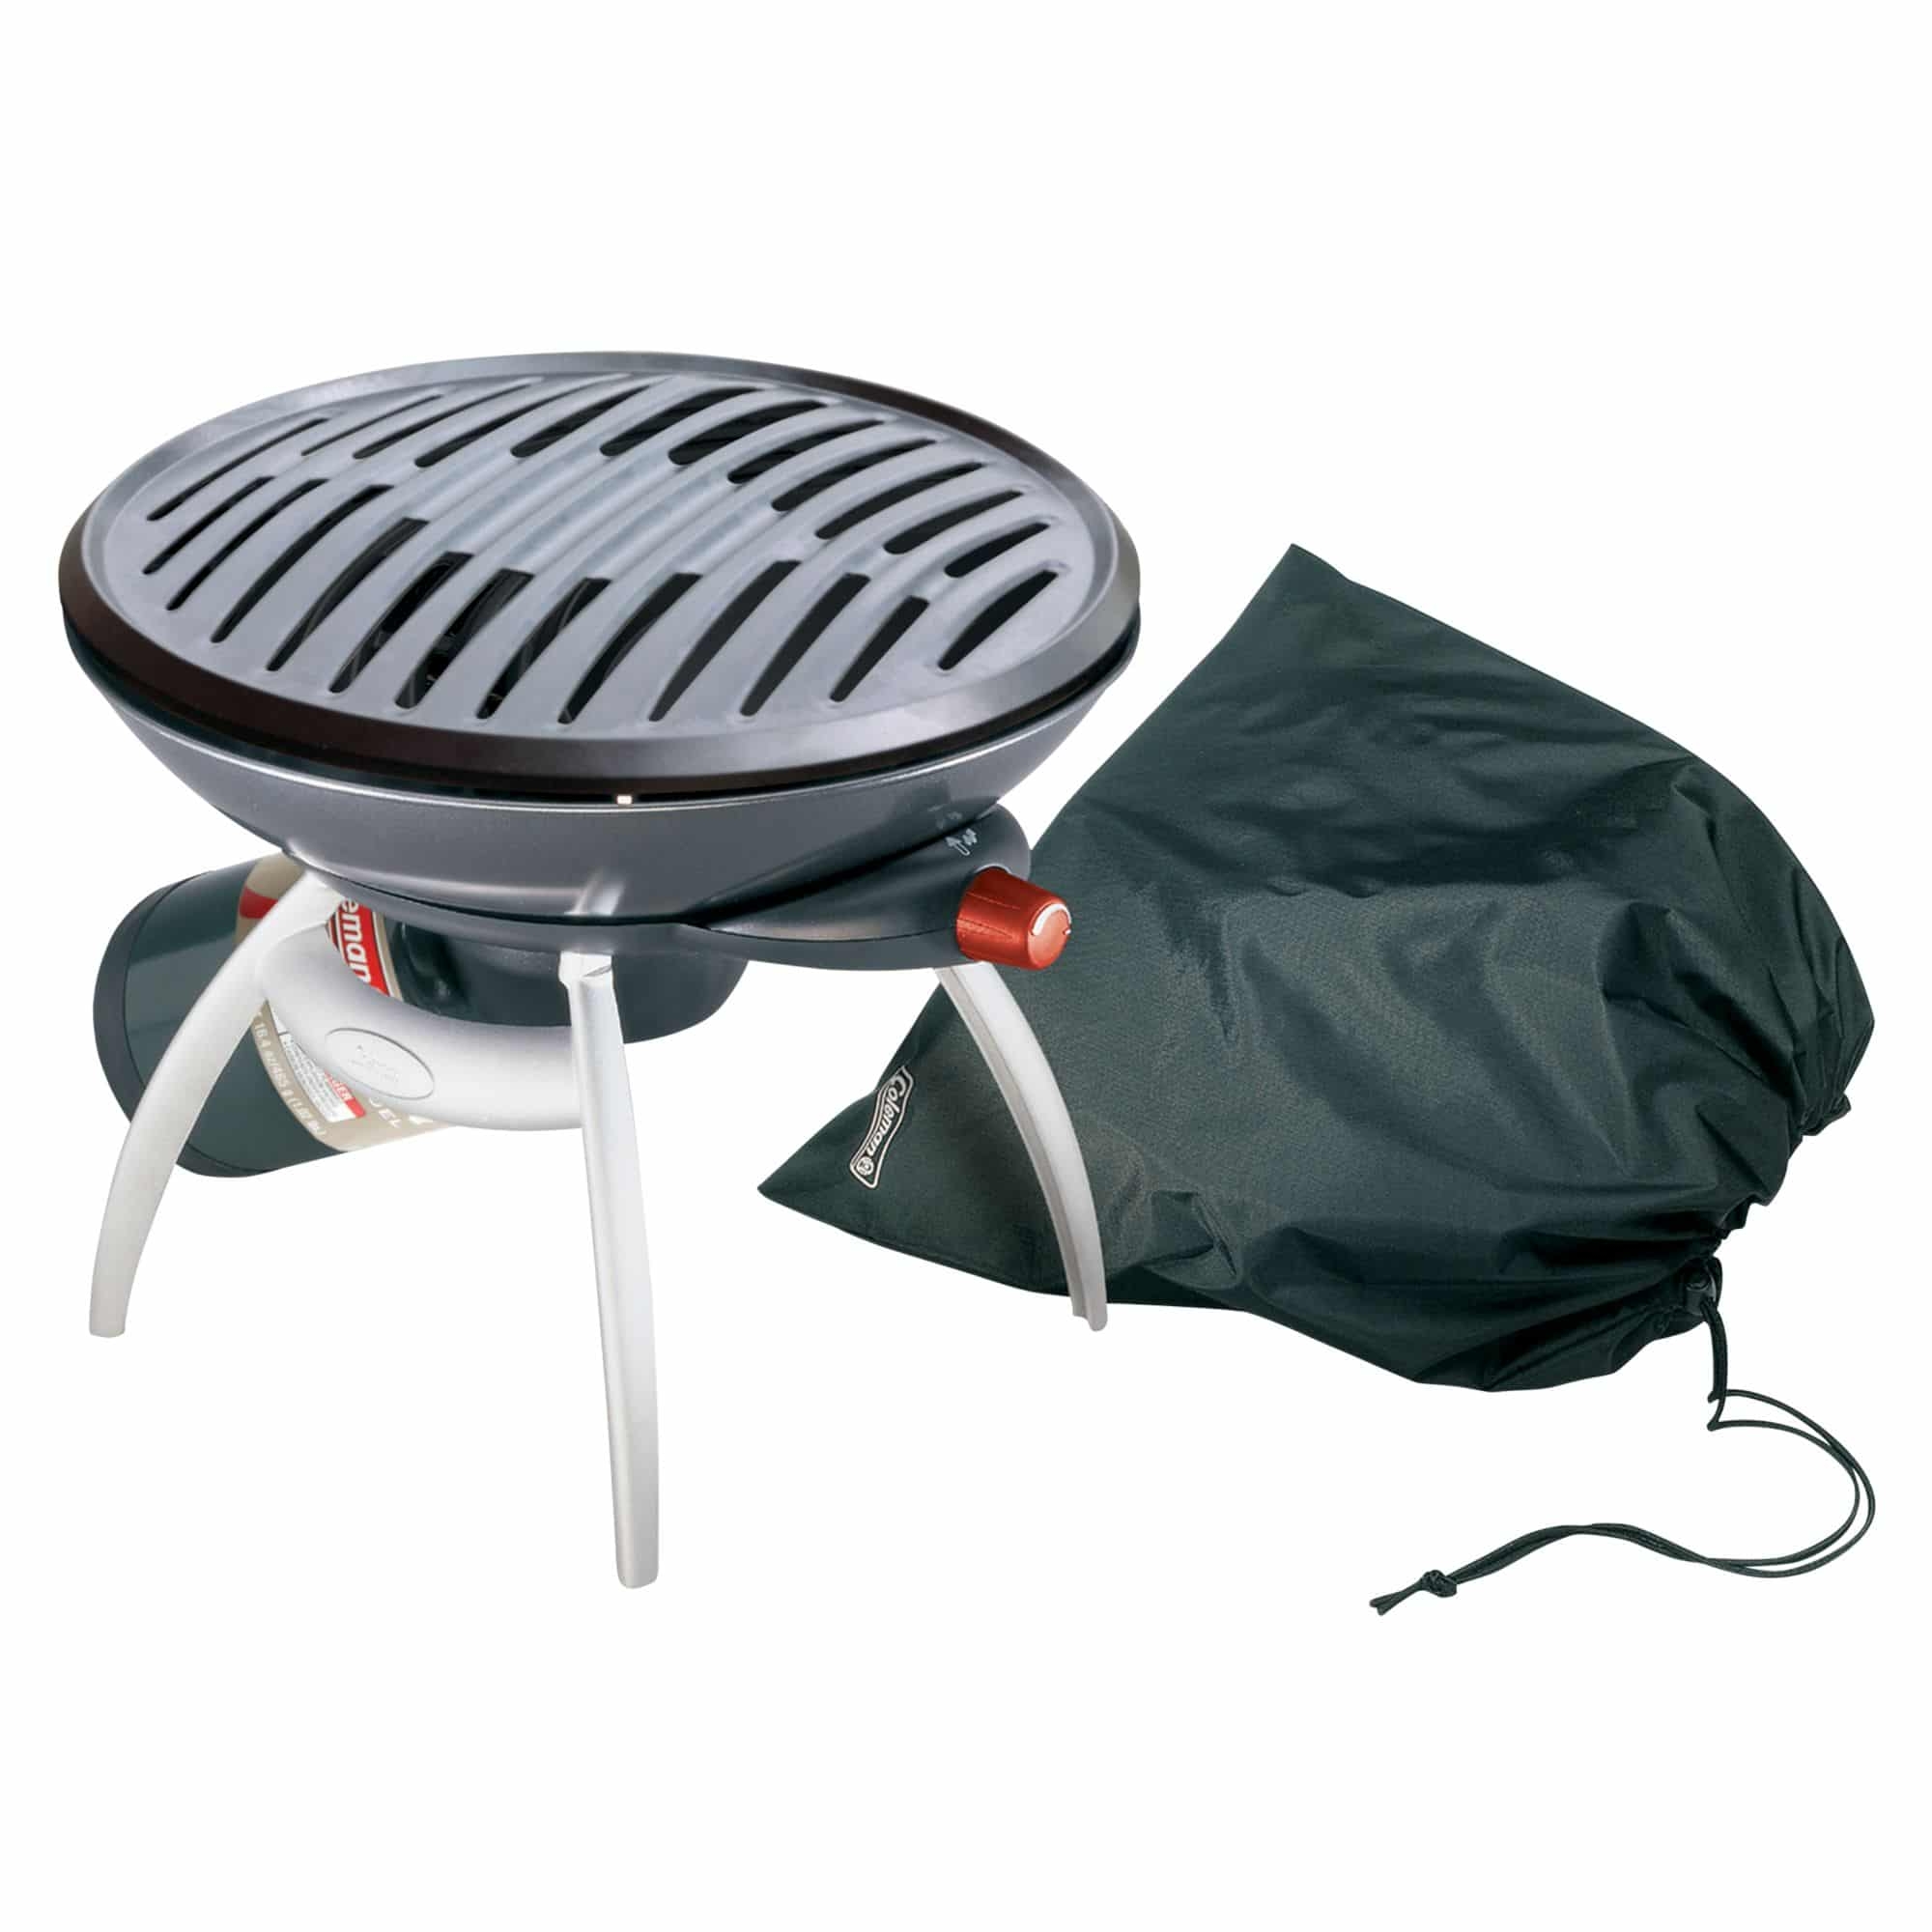 New coleman portable propane party grill hibachi camping stove grill